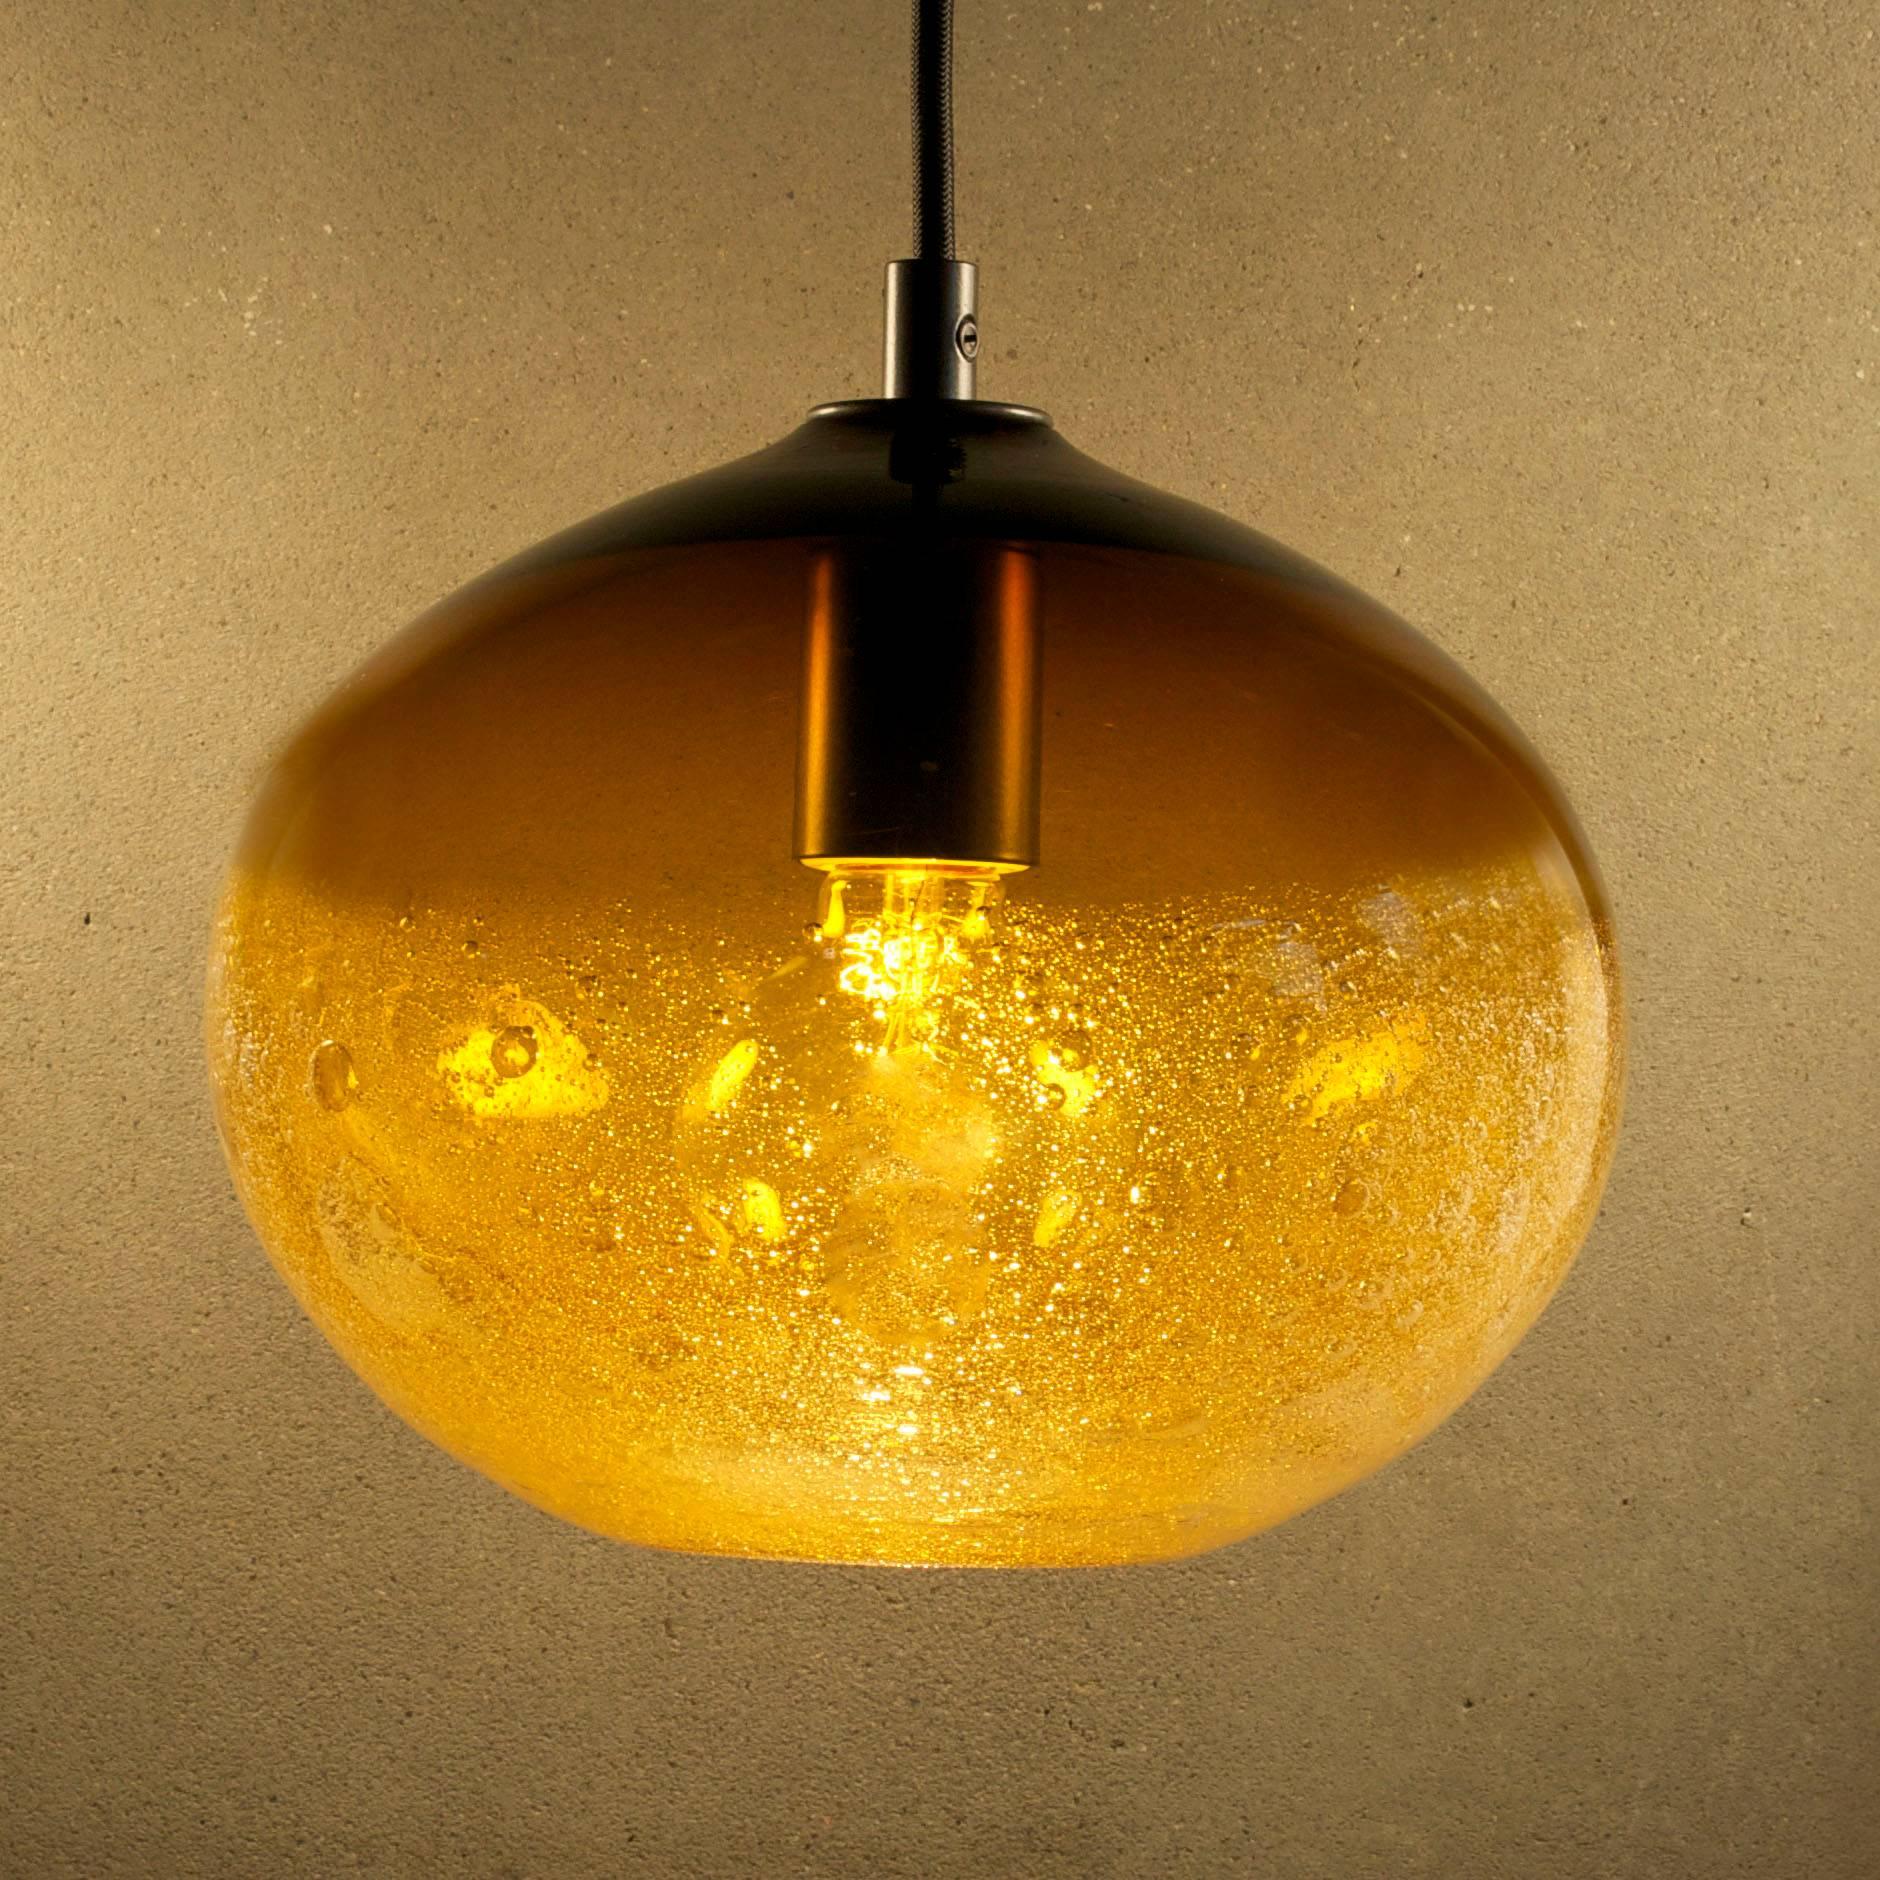 Amber Ellipse Bubble Pendant • Hand Blown Glass • Made in USA
Canopy / Cord Options Available
Various Colors Available
Measures: 7